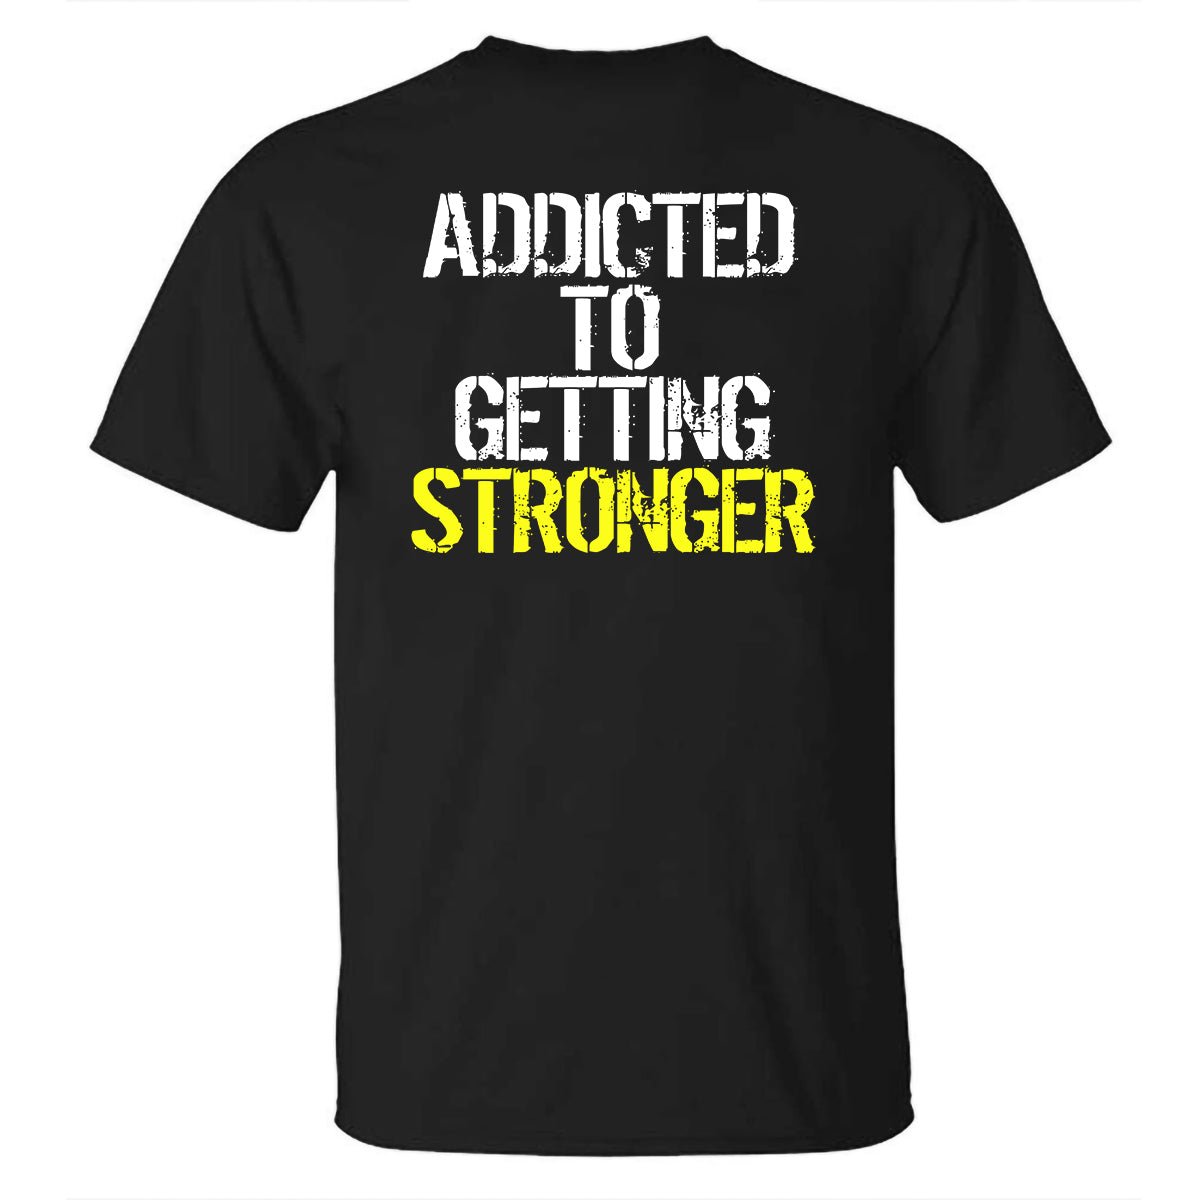 Addicted To Getting Stronger Printed T-shirt